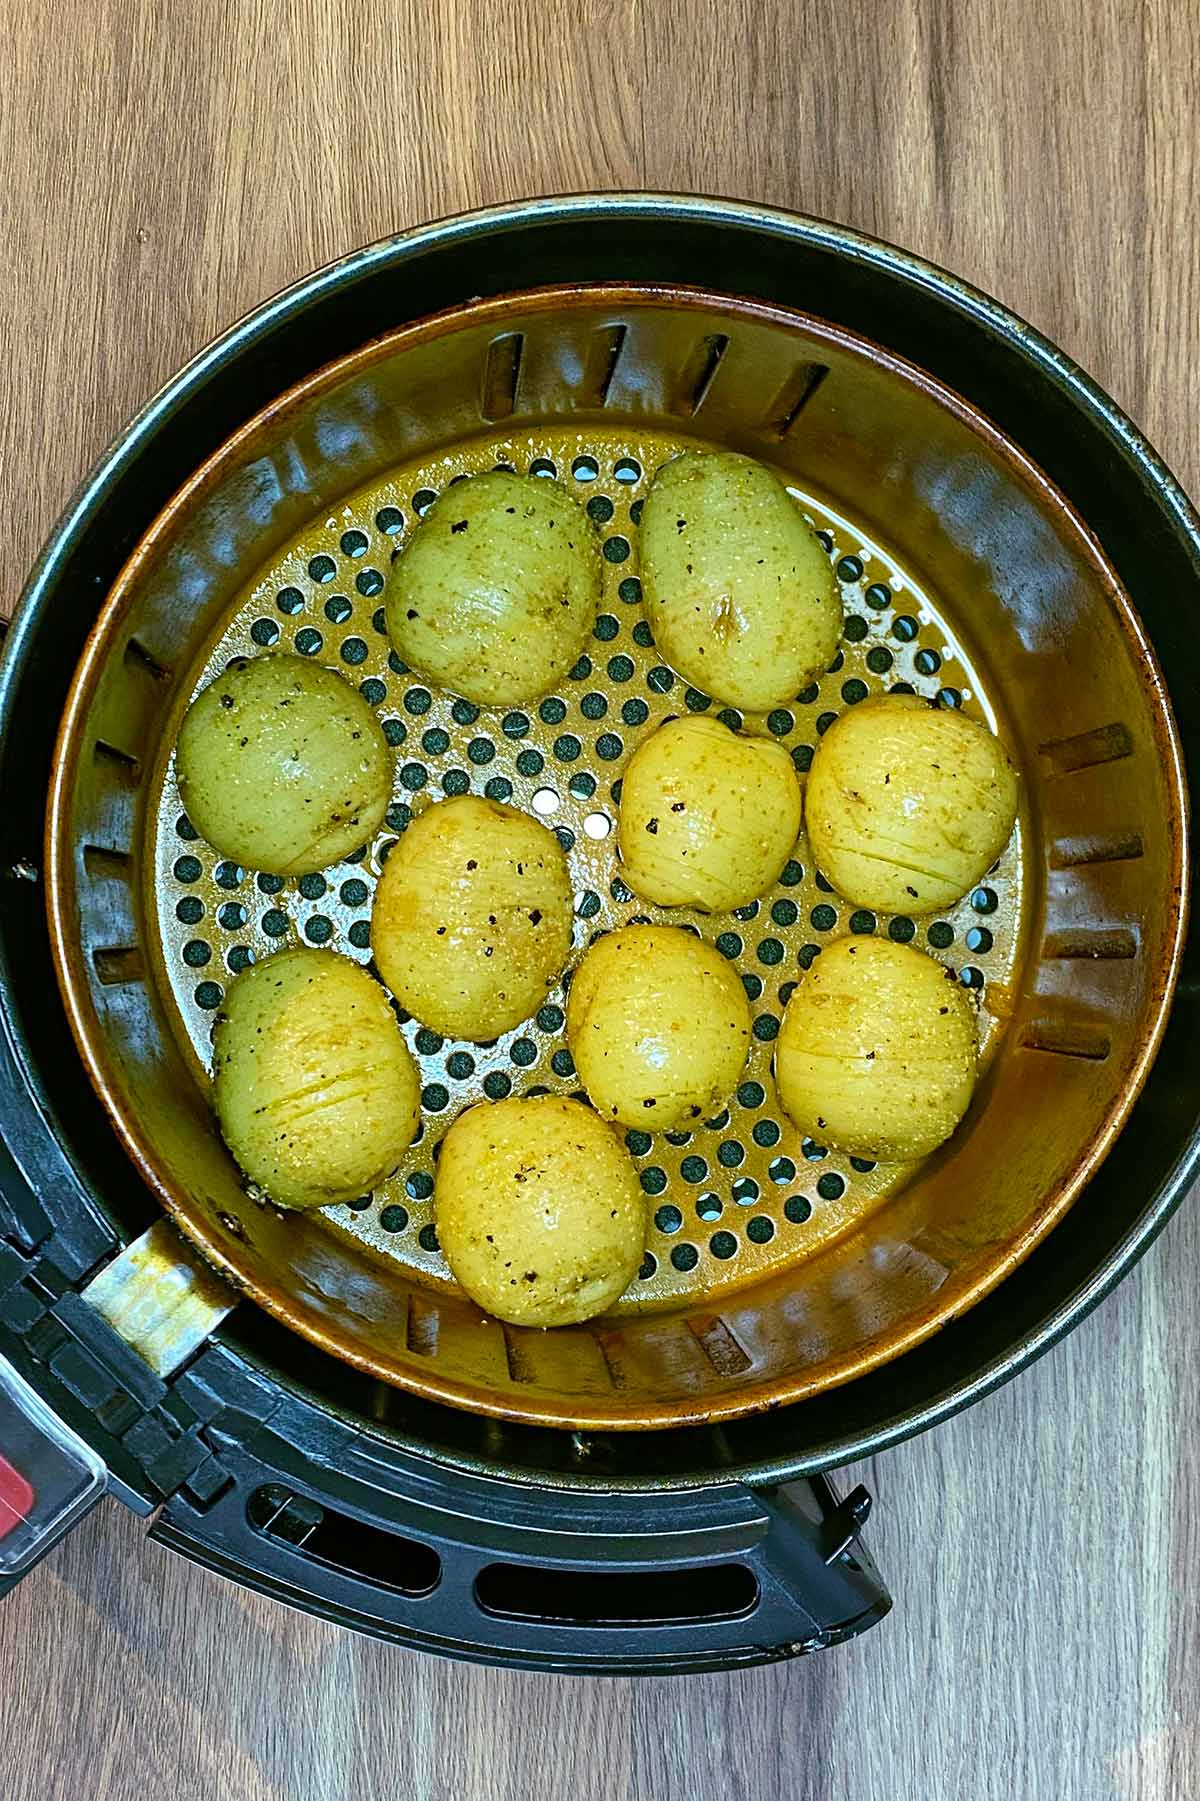 An air fryer basket containing uncooked hasselback potatoes.